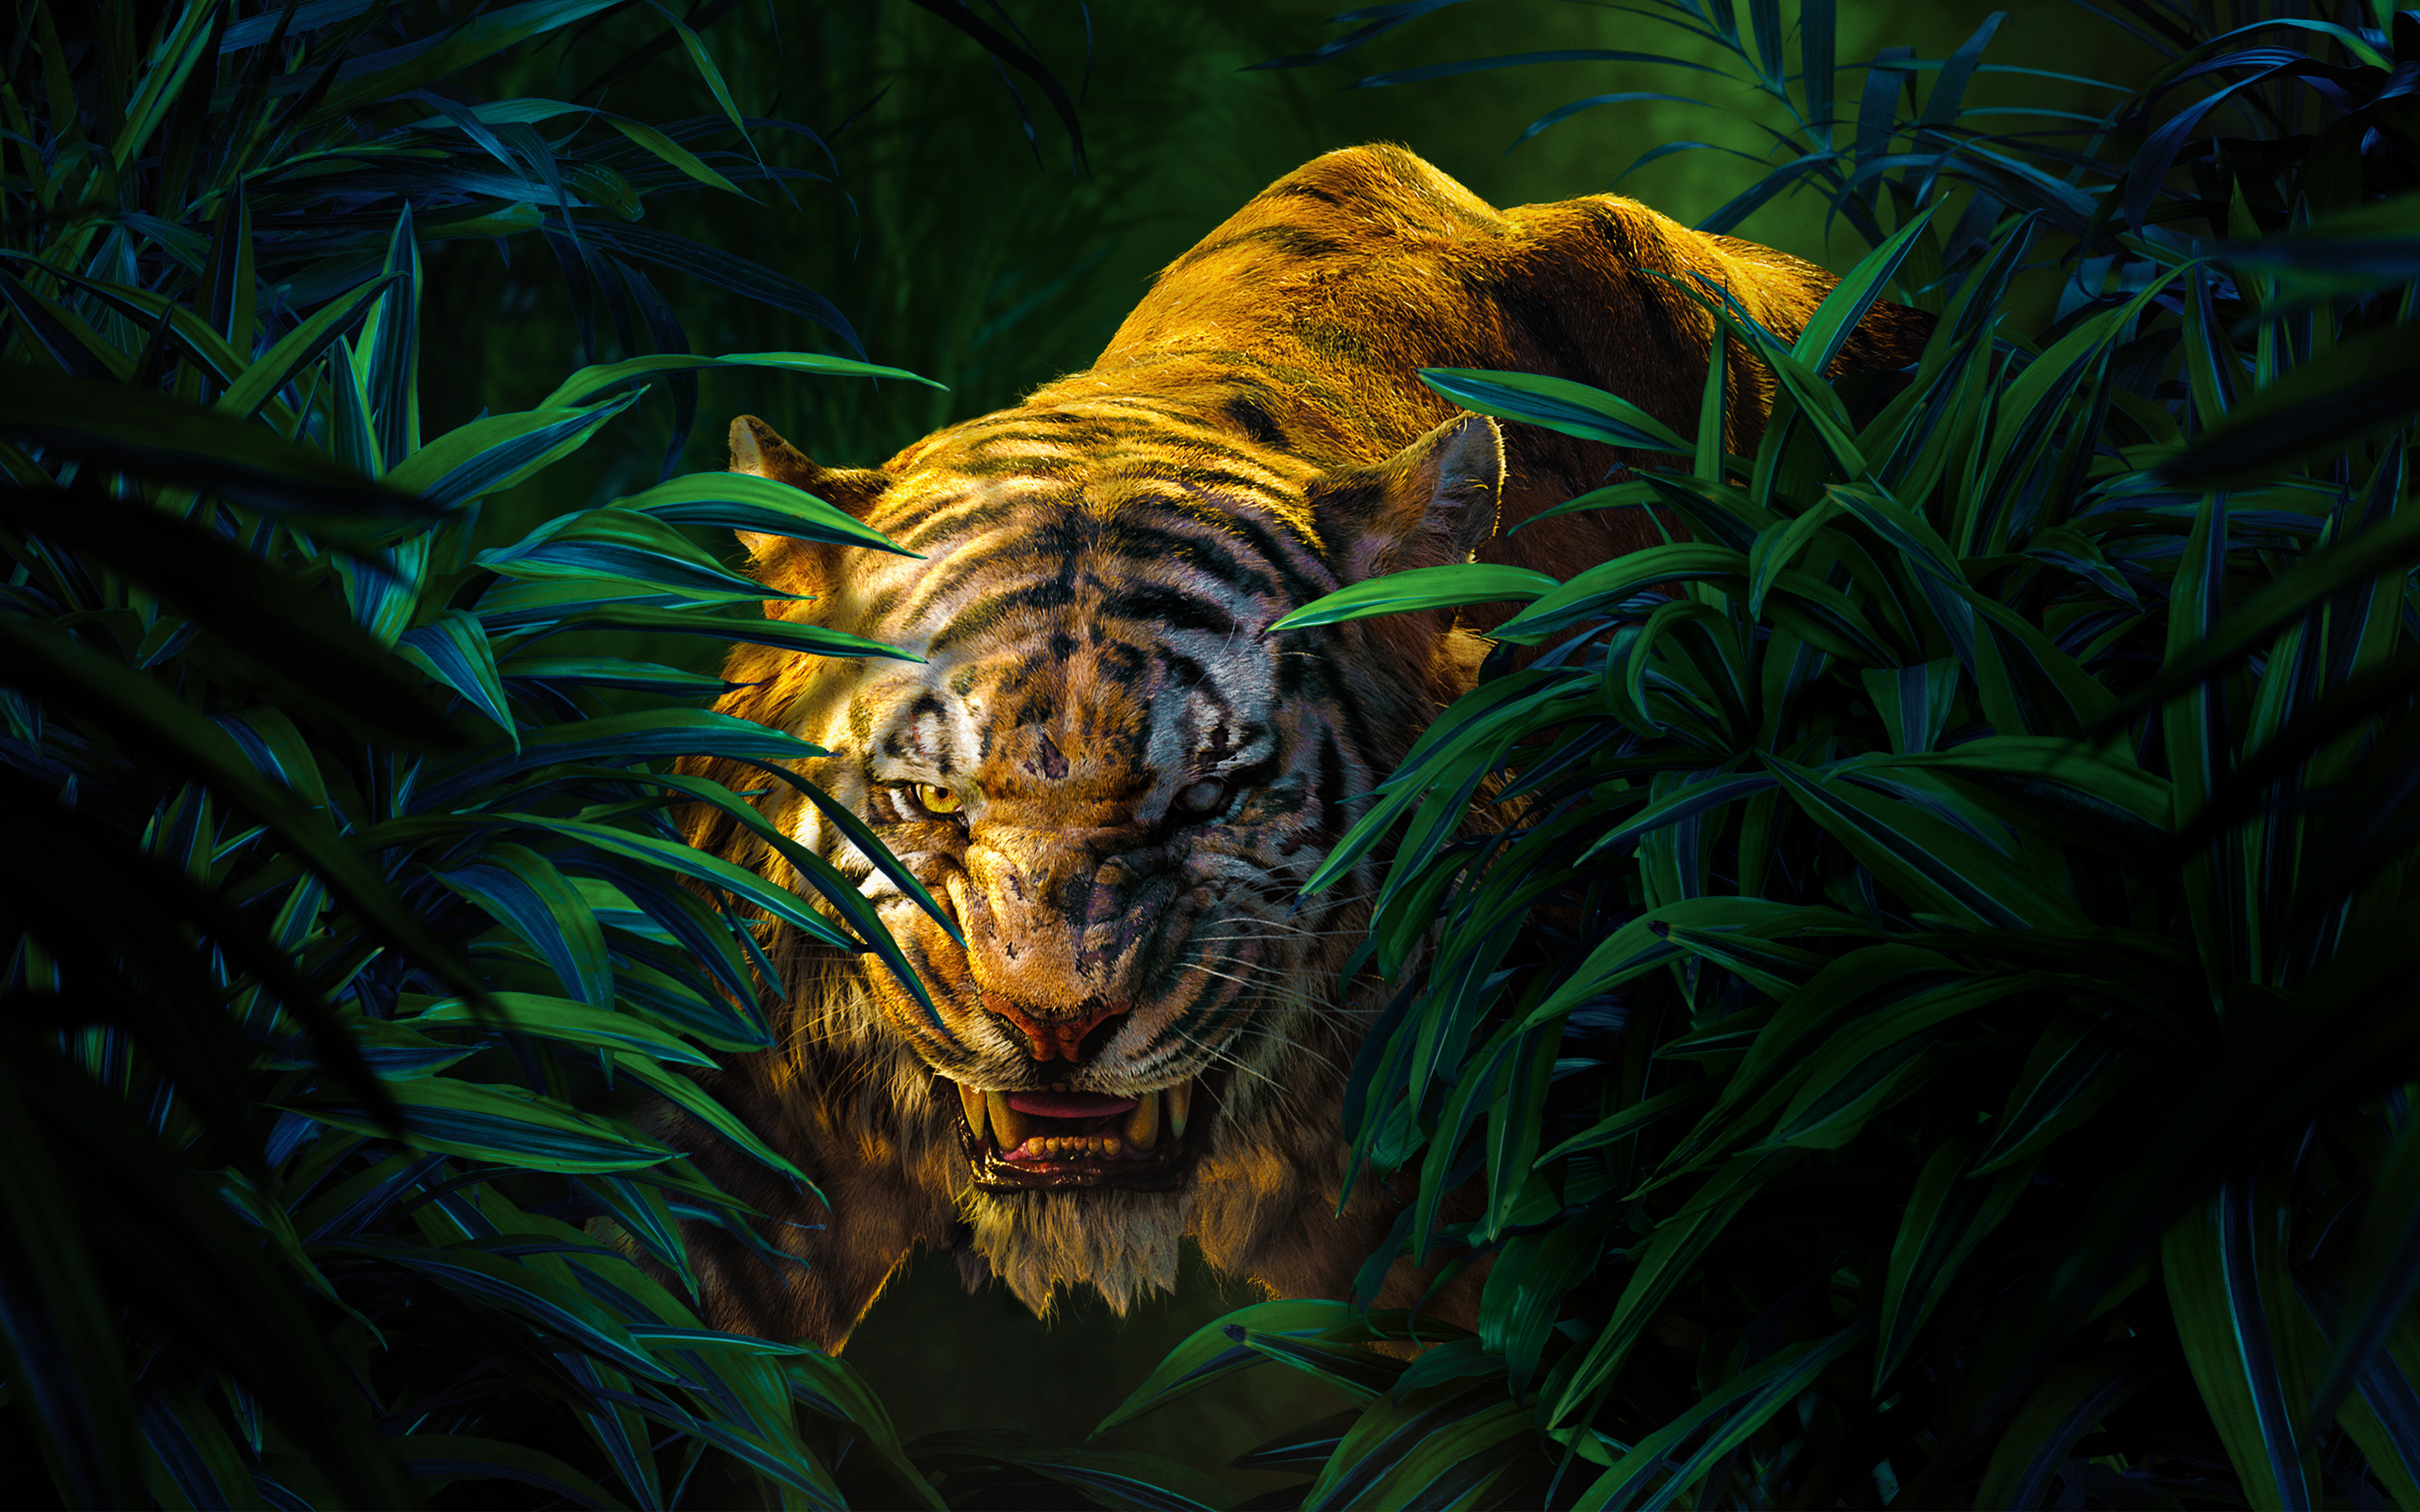 Jungle Book Wallpapers 6N4CWNF 2880x1800 px   4USkY